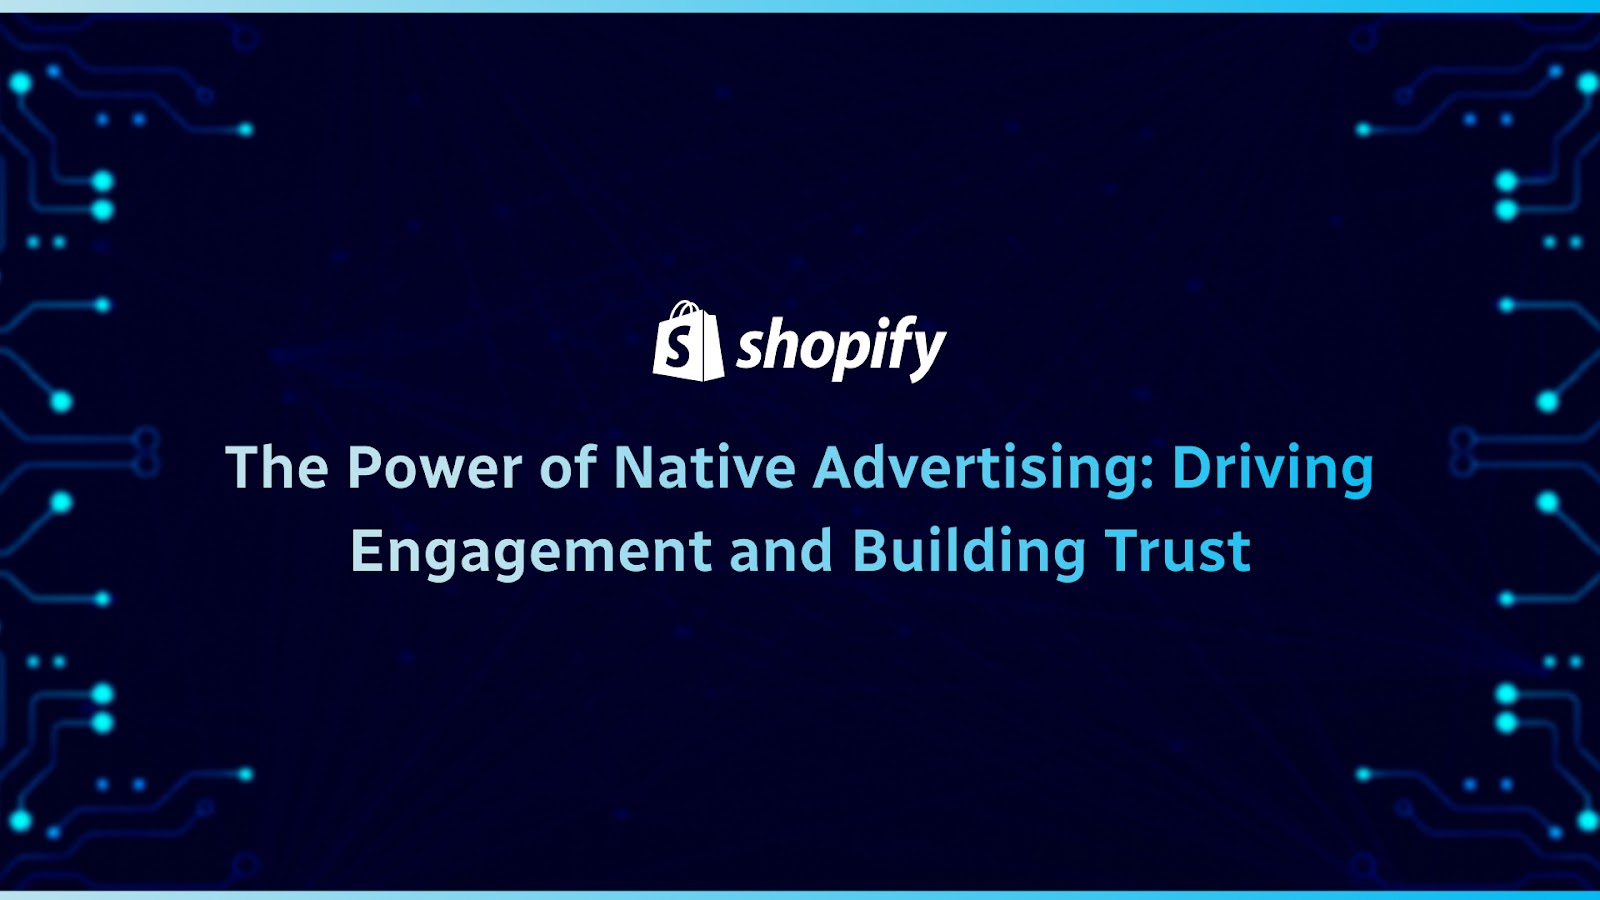 The Power of Native Advertising Driving Engagement and Building Trust